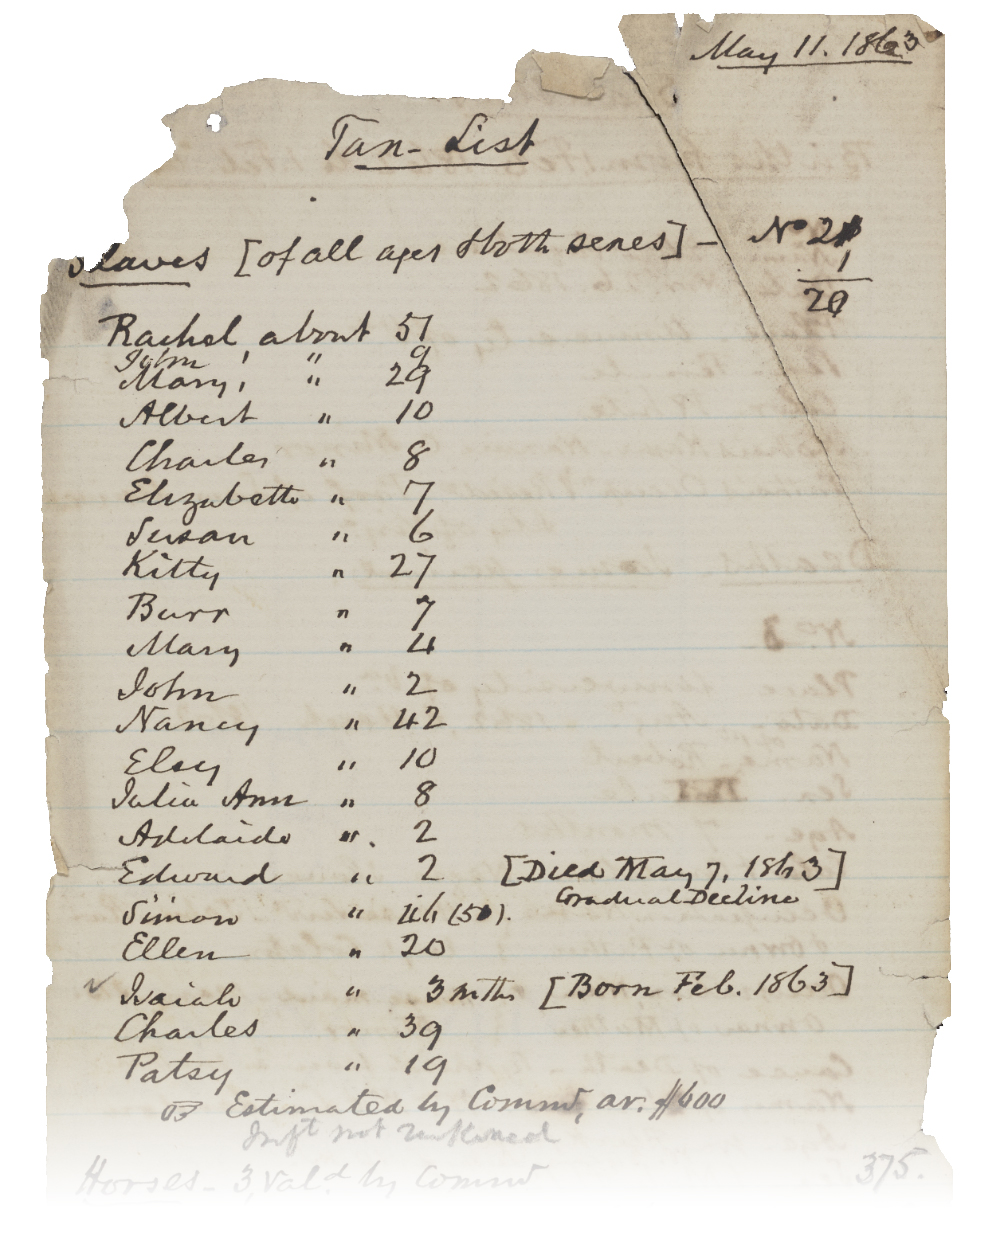 A fragment of paper with a handwritten tax list from May 1863, listing names and ages of the enslaved.